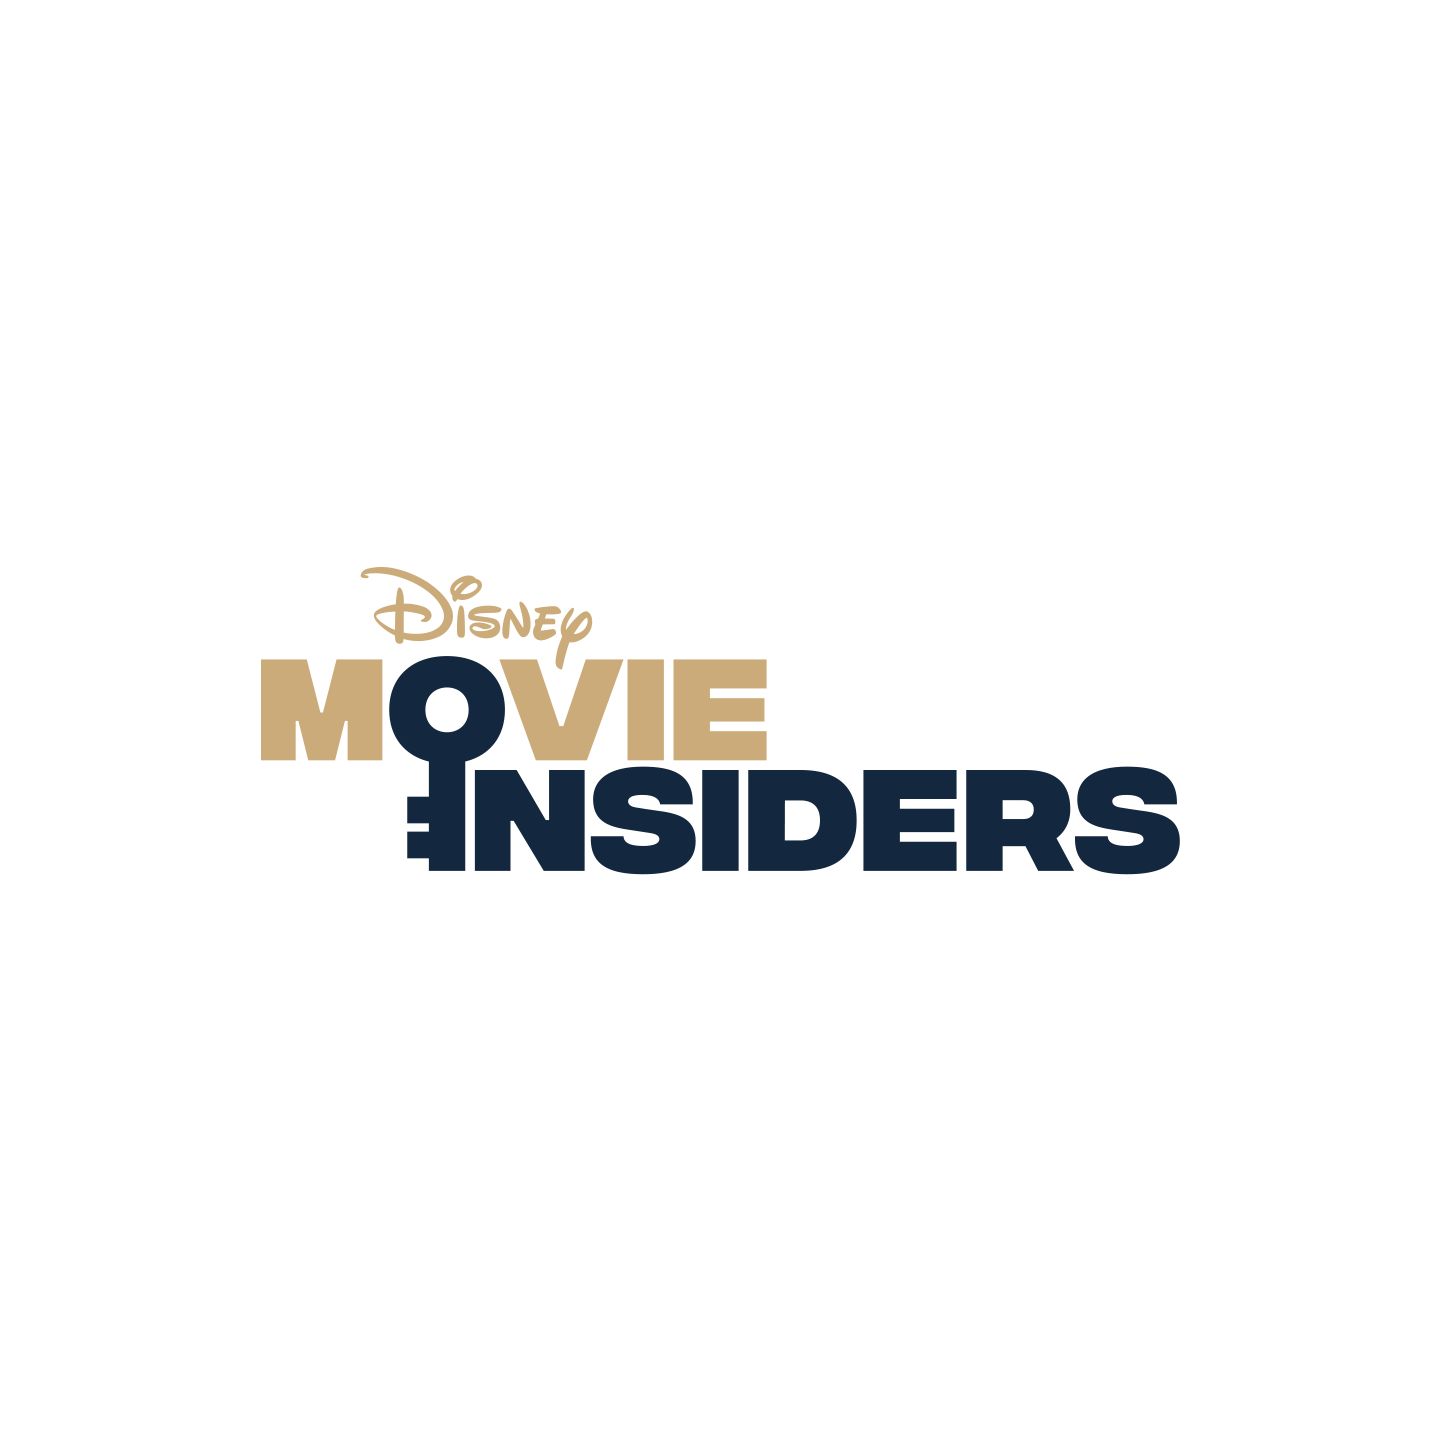 Disney Movie Insiders - Disneynature POLOAR BEAR - Hear from the directors of Disneynature's latest movie about the challenges Polar Bears face in an ever-changing world. LISTEN NOW